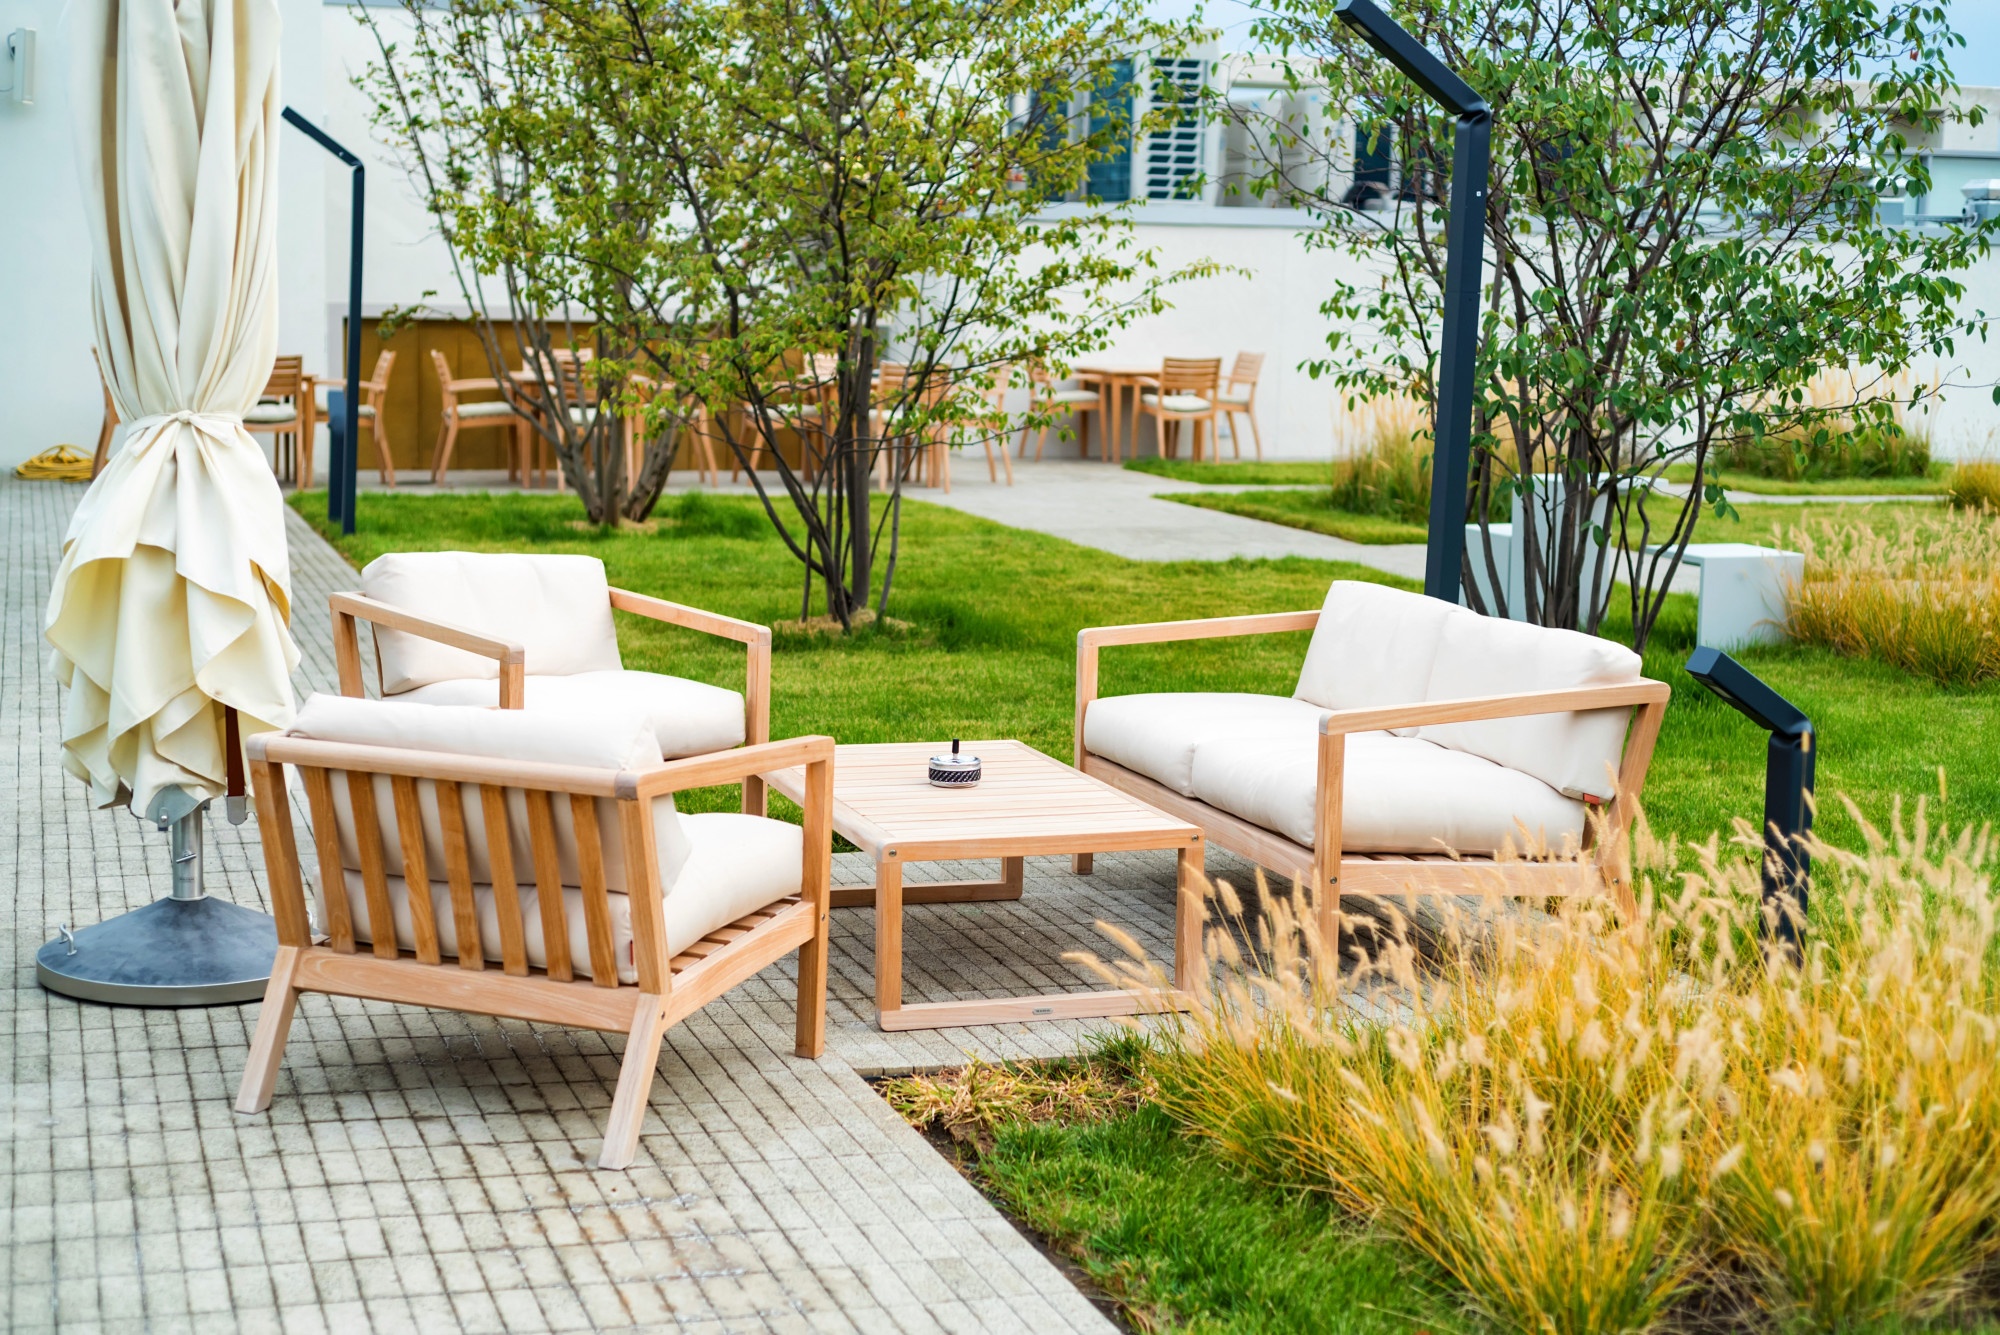 How to Improve Your Backyard: 10 Tips for a Beautiful Outdoor Space